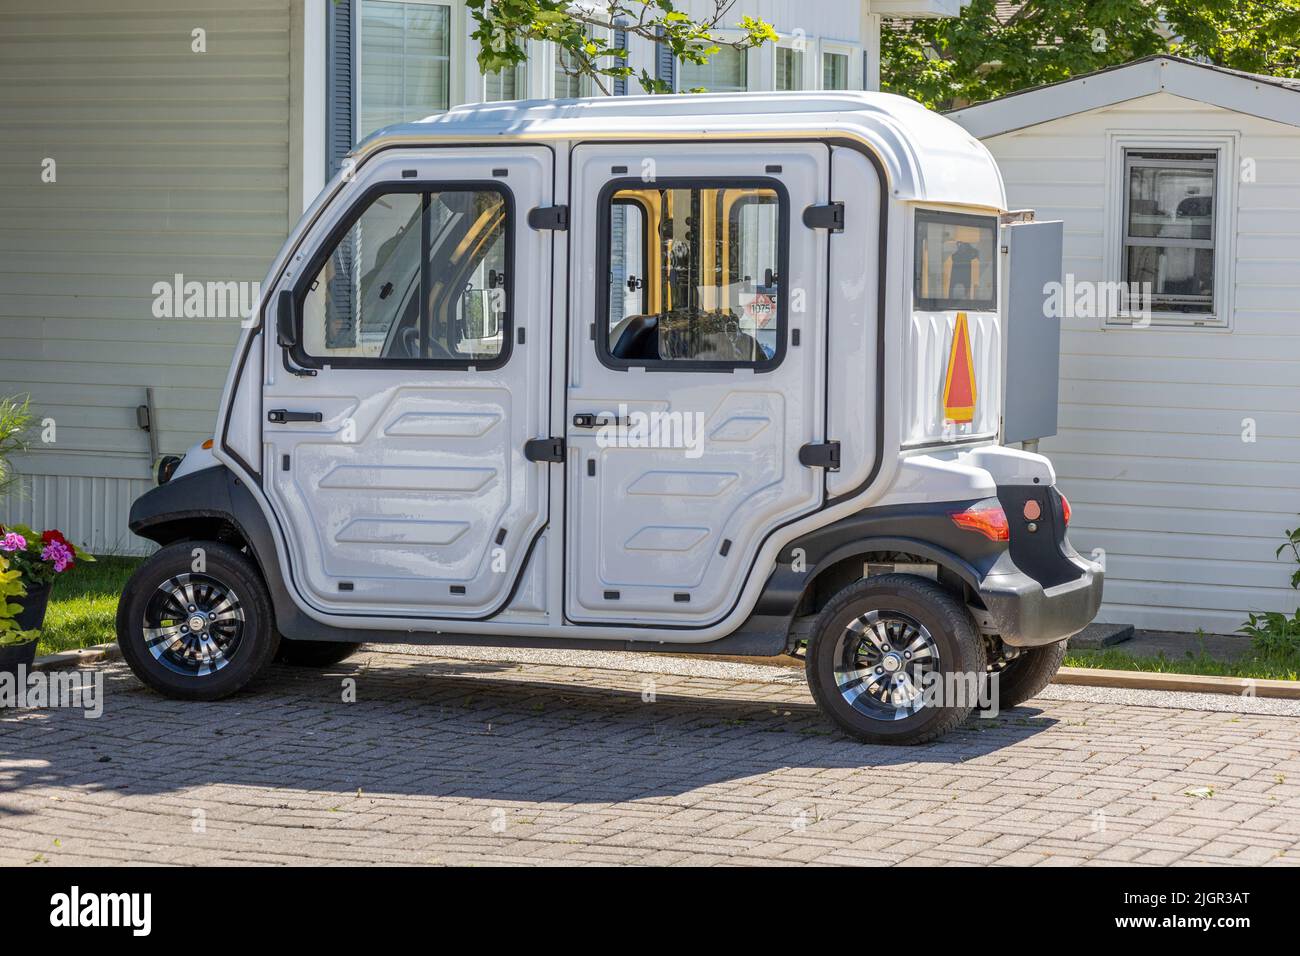 AGT Electric LSV 4 Fully Enclosed Electric Golf Cart Used As A Commercial Utility Vehicle, Small EV Used In A Gated Community Stock Photo